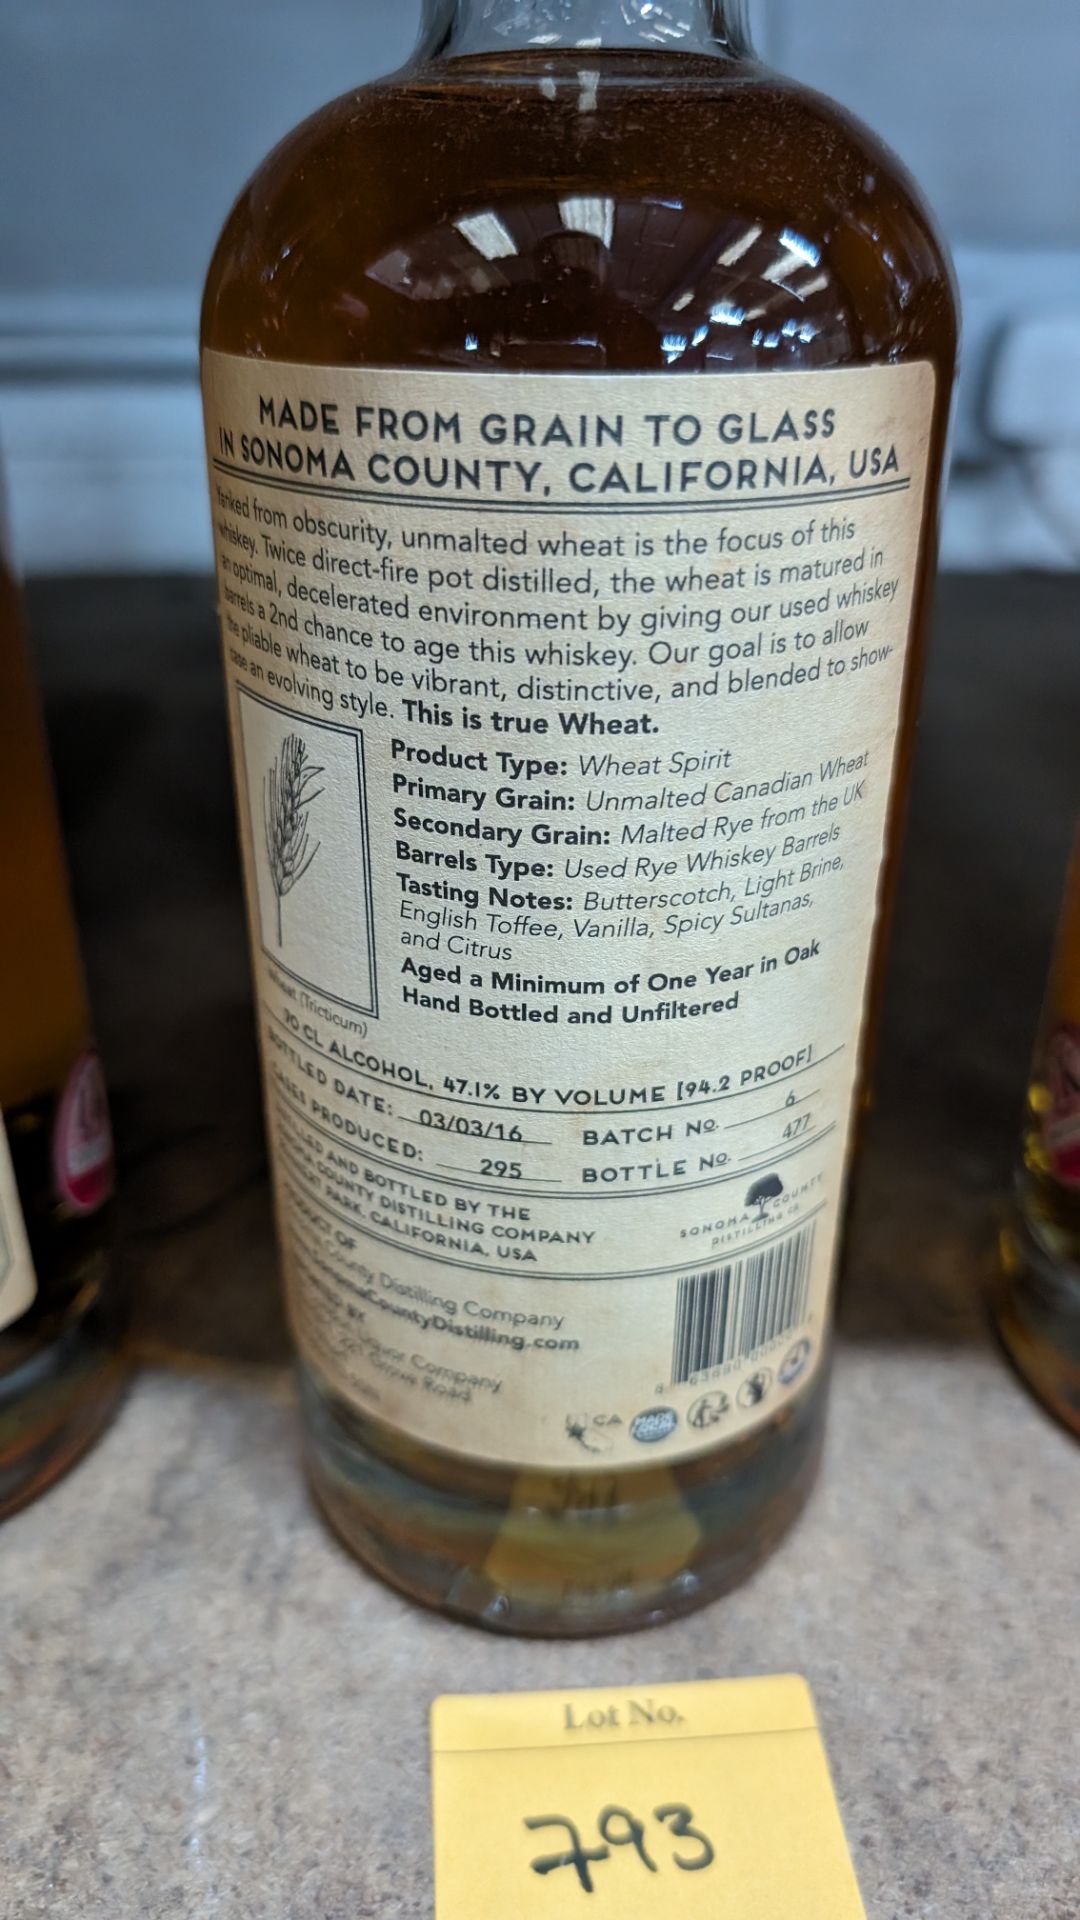 1 off 700ml bottle of Sonoma County 2nd Chance Wheat Double Alembic Pot Distilled Whiskey. 47.1% al - Image 4 of 5